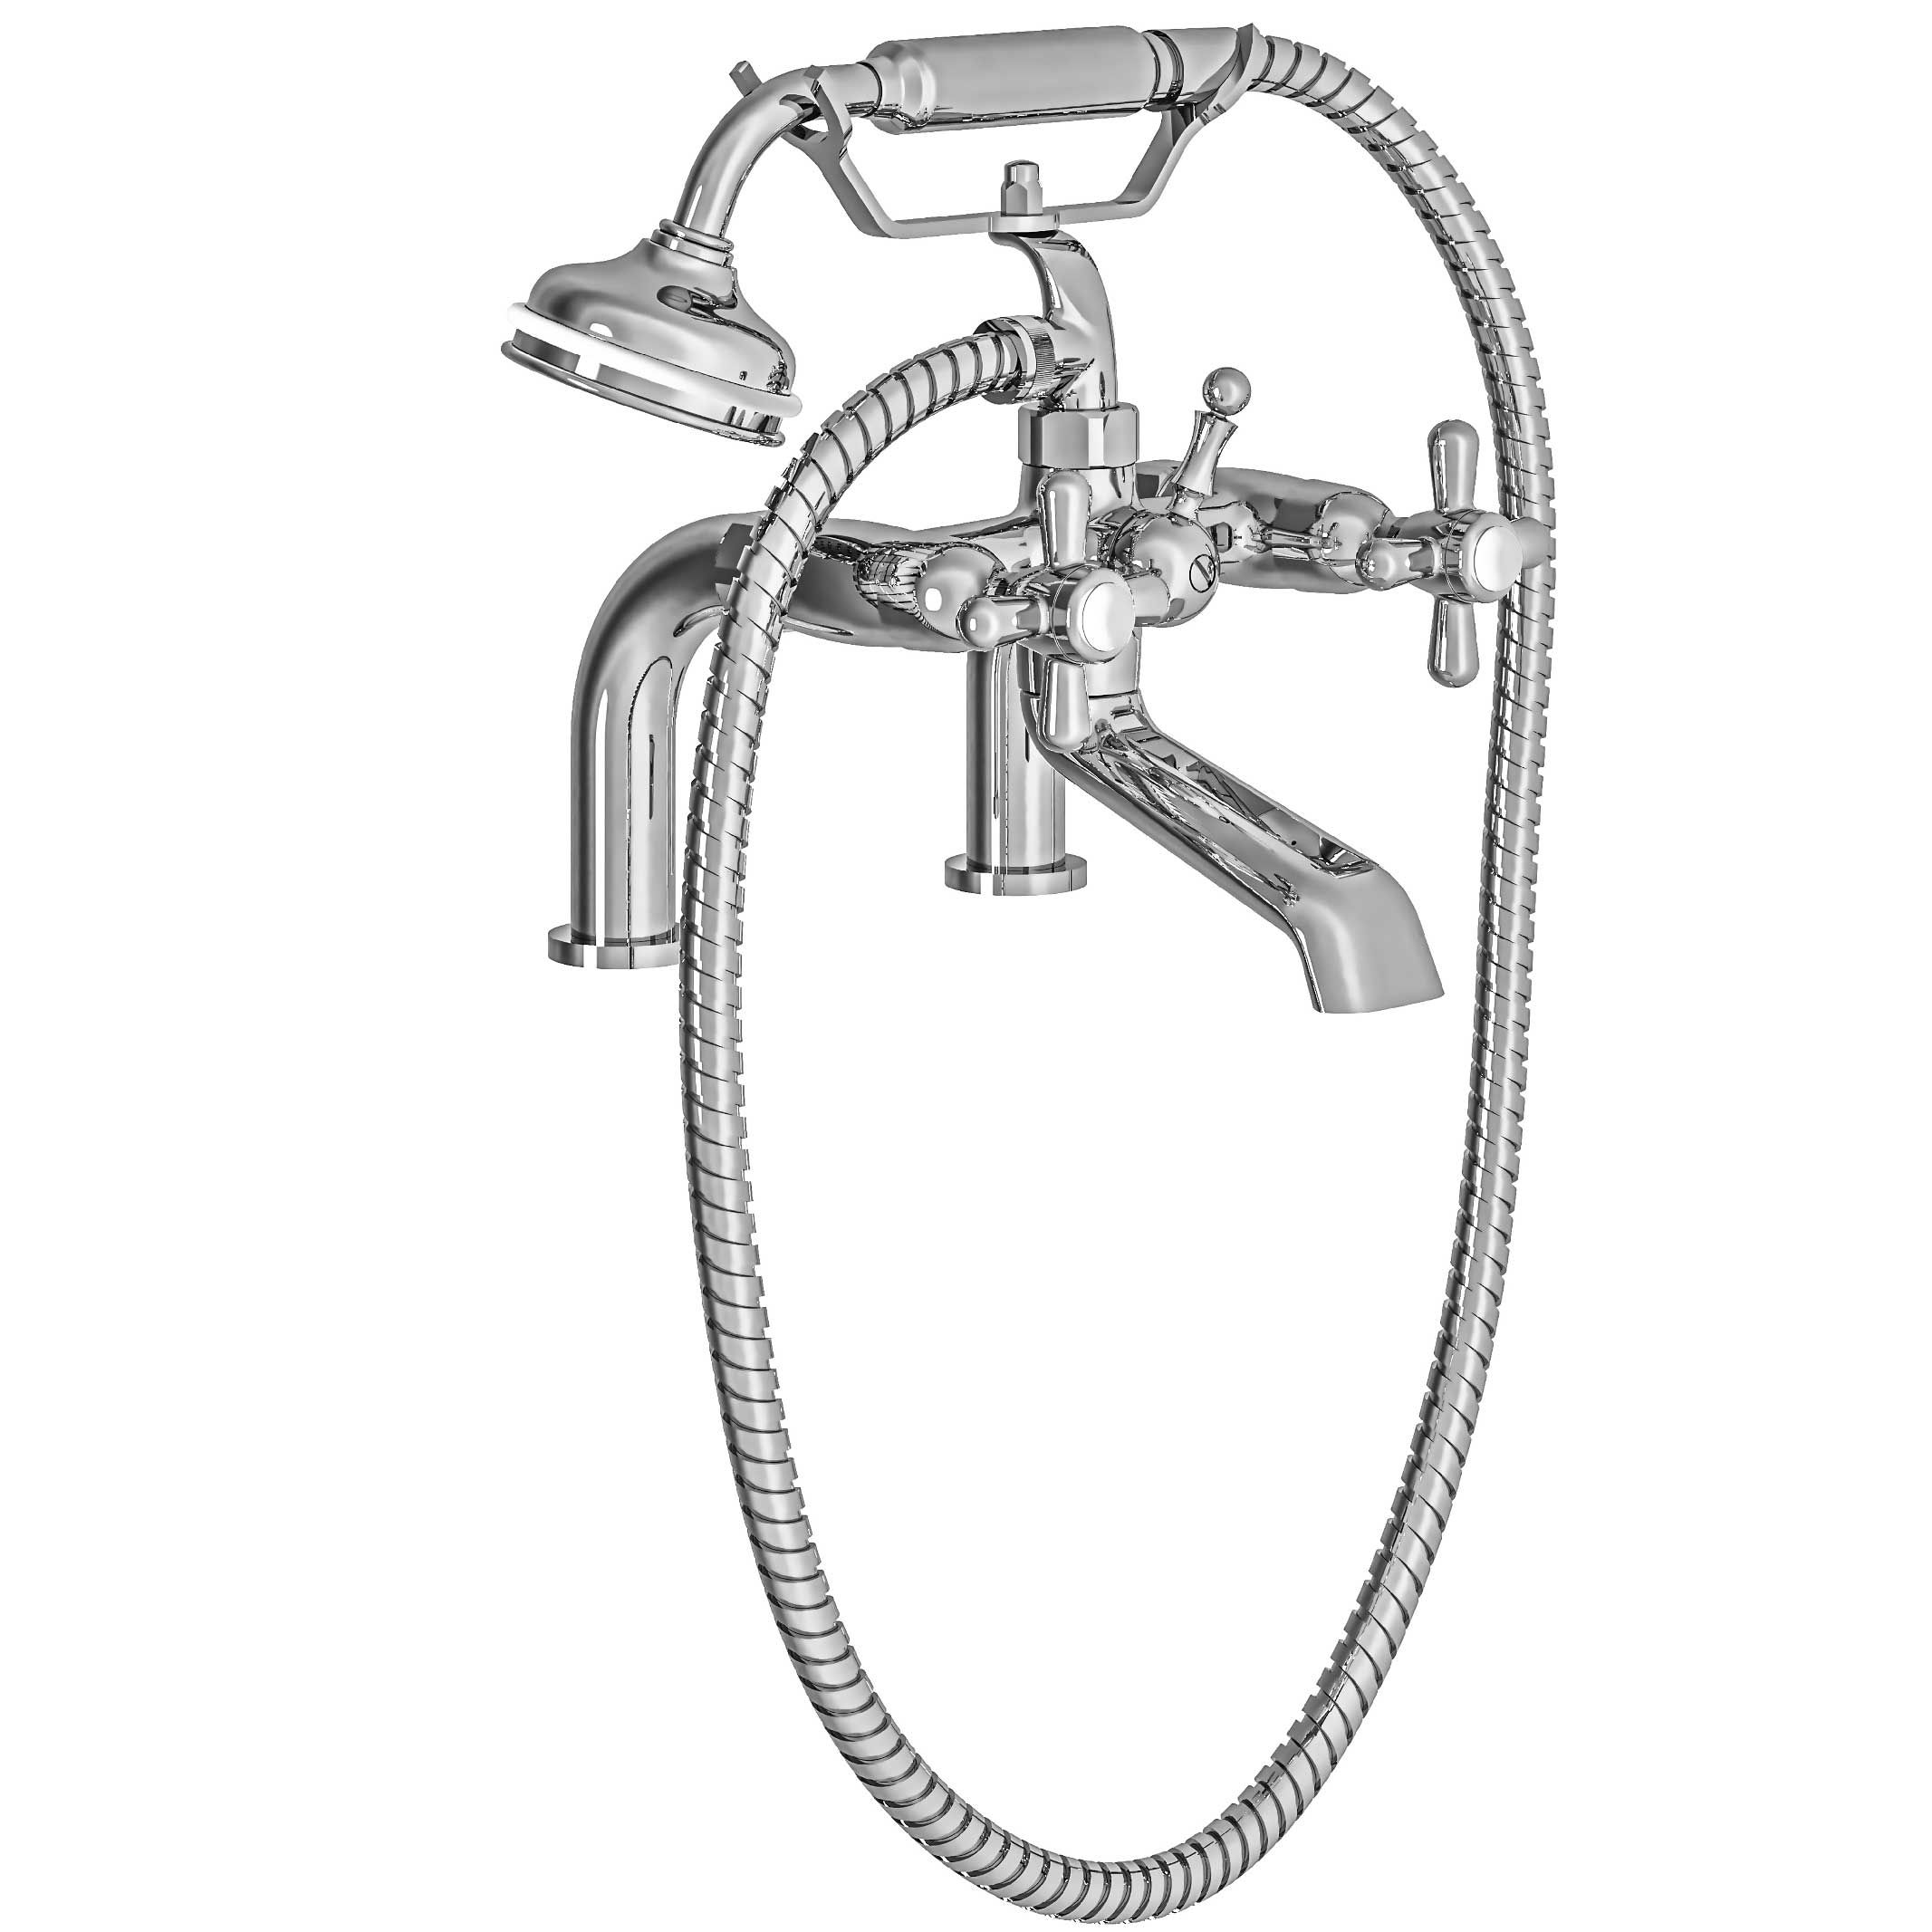 M40-3306 Rim mounted bath and shower mixer